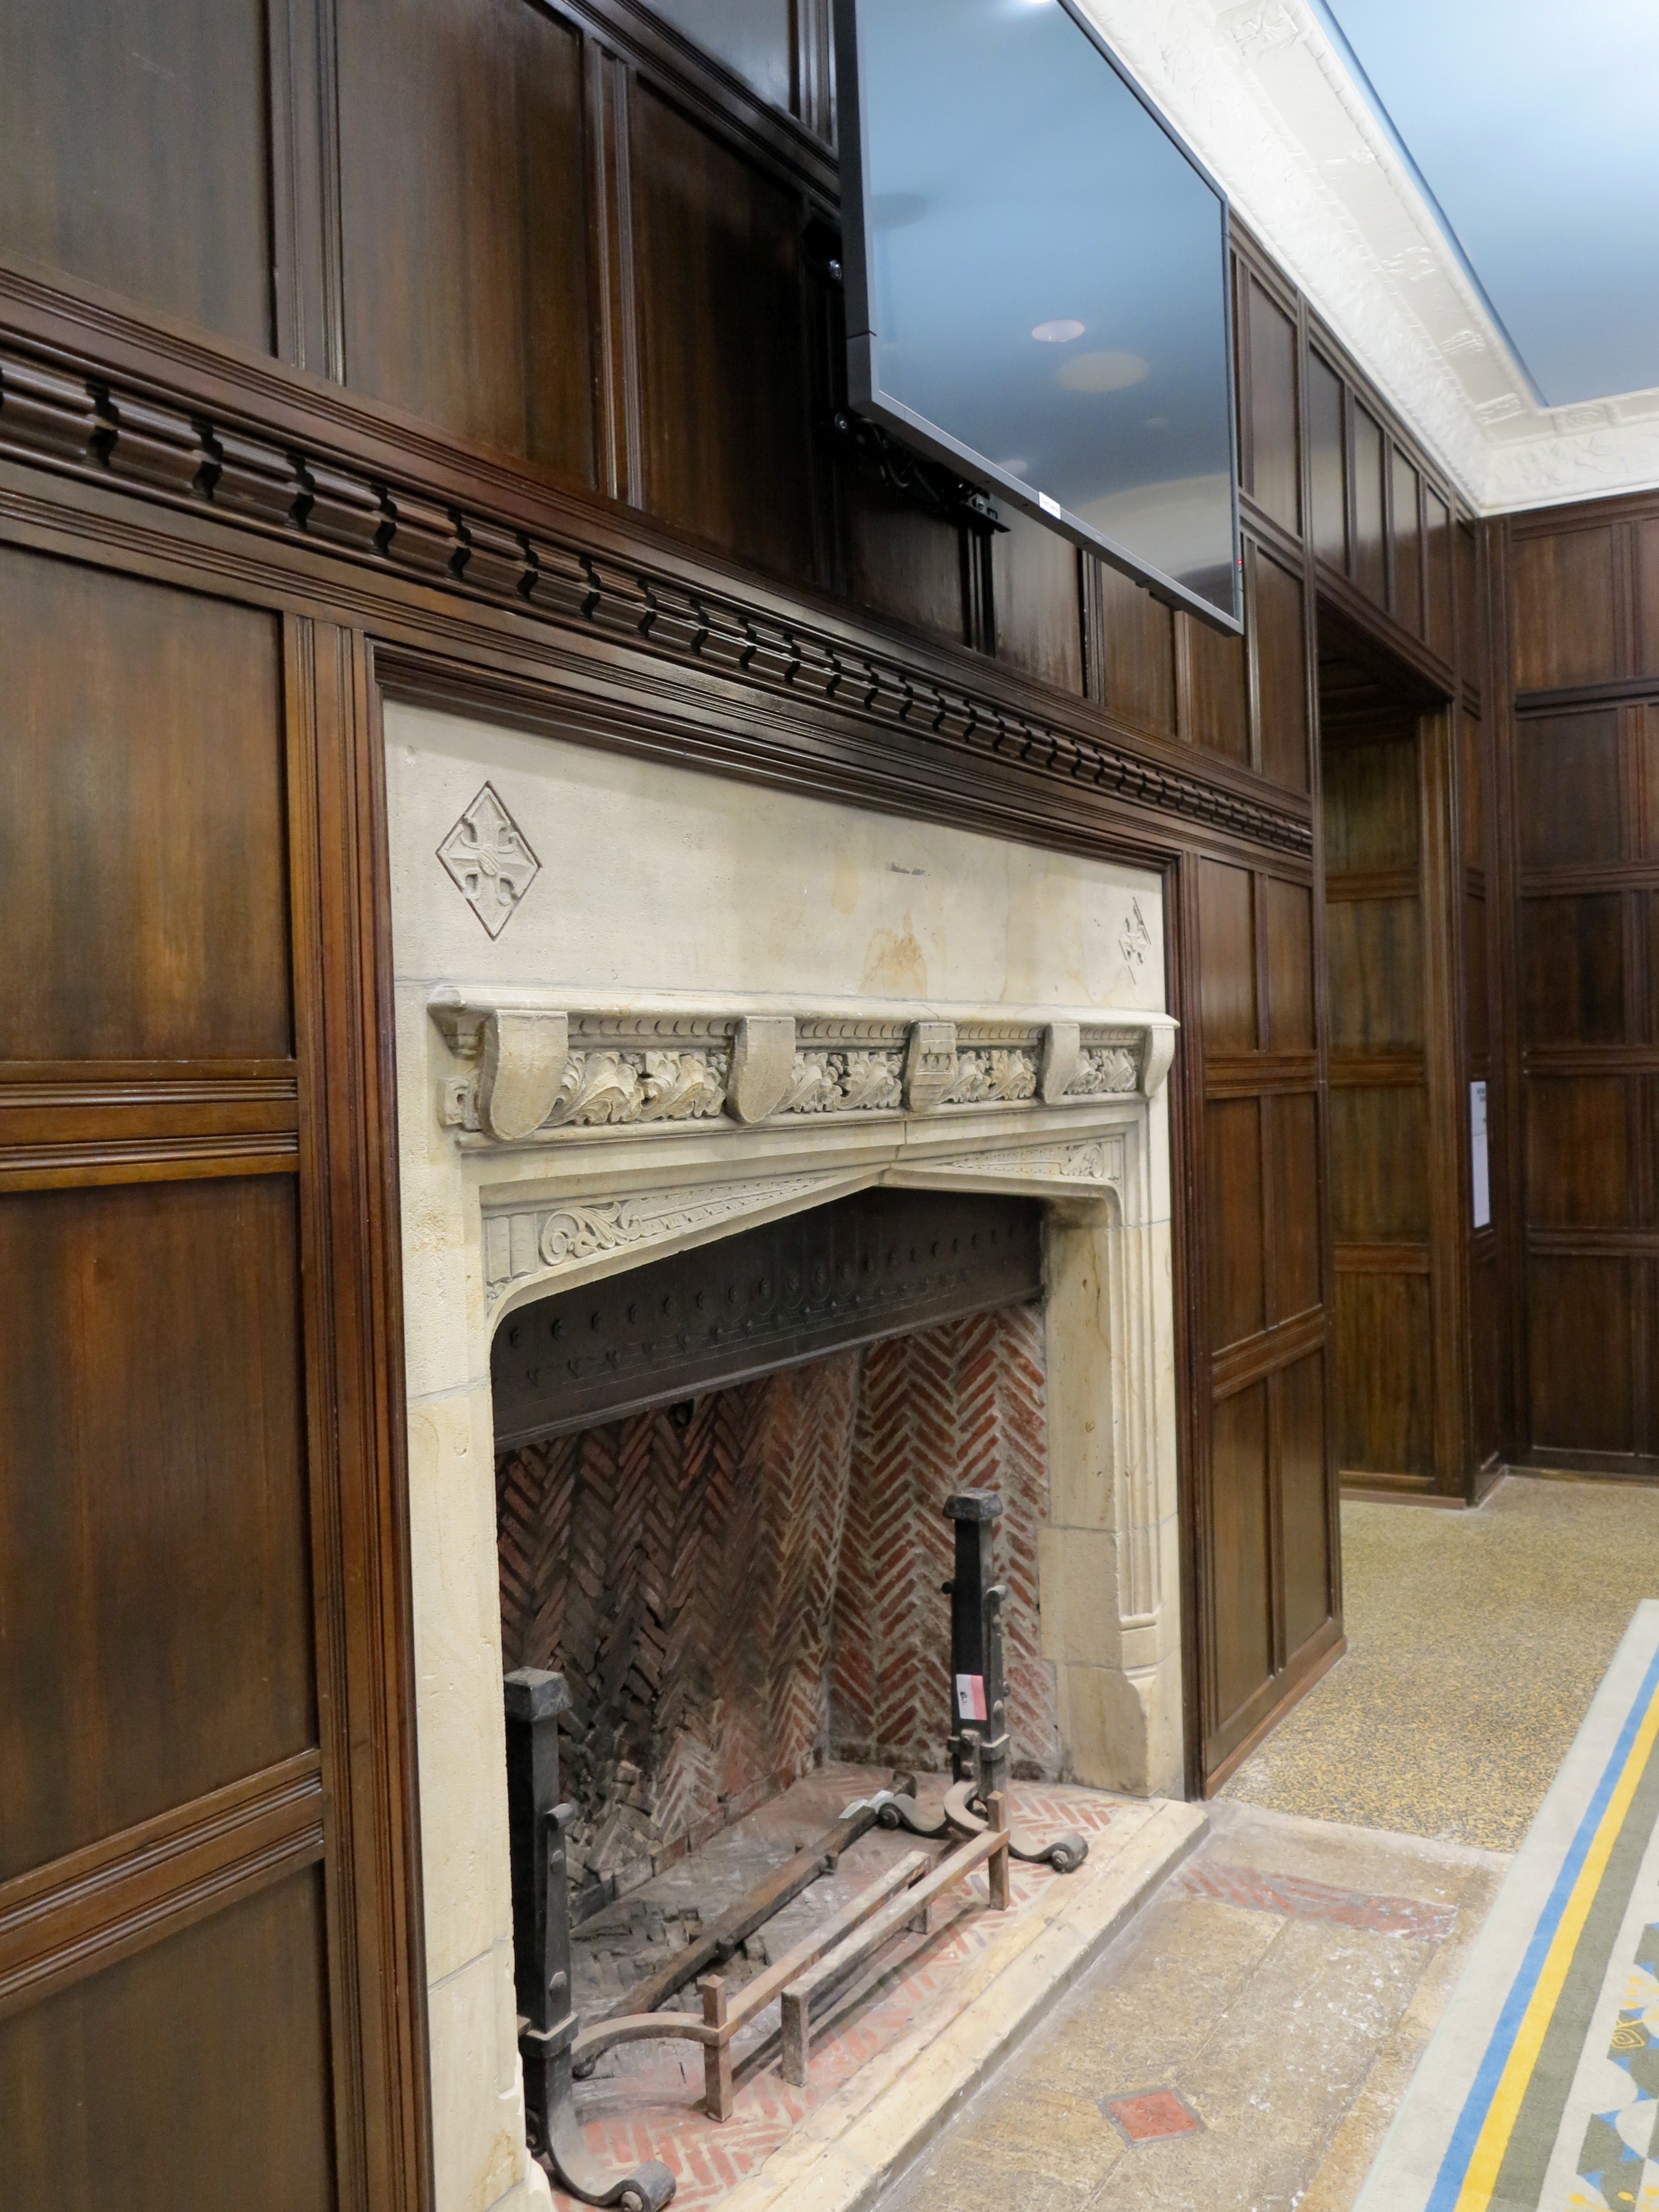 One of the ARCH's many fireplaces